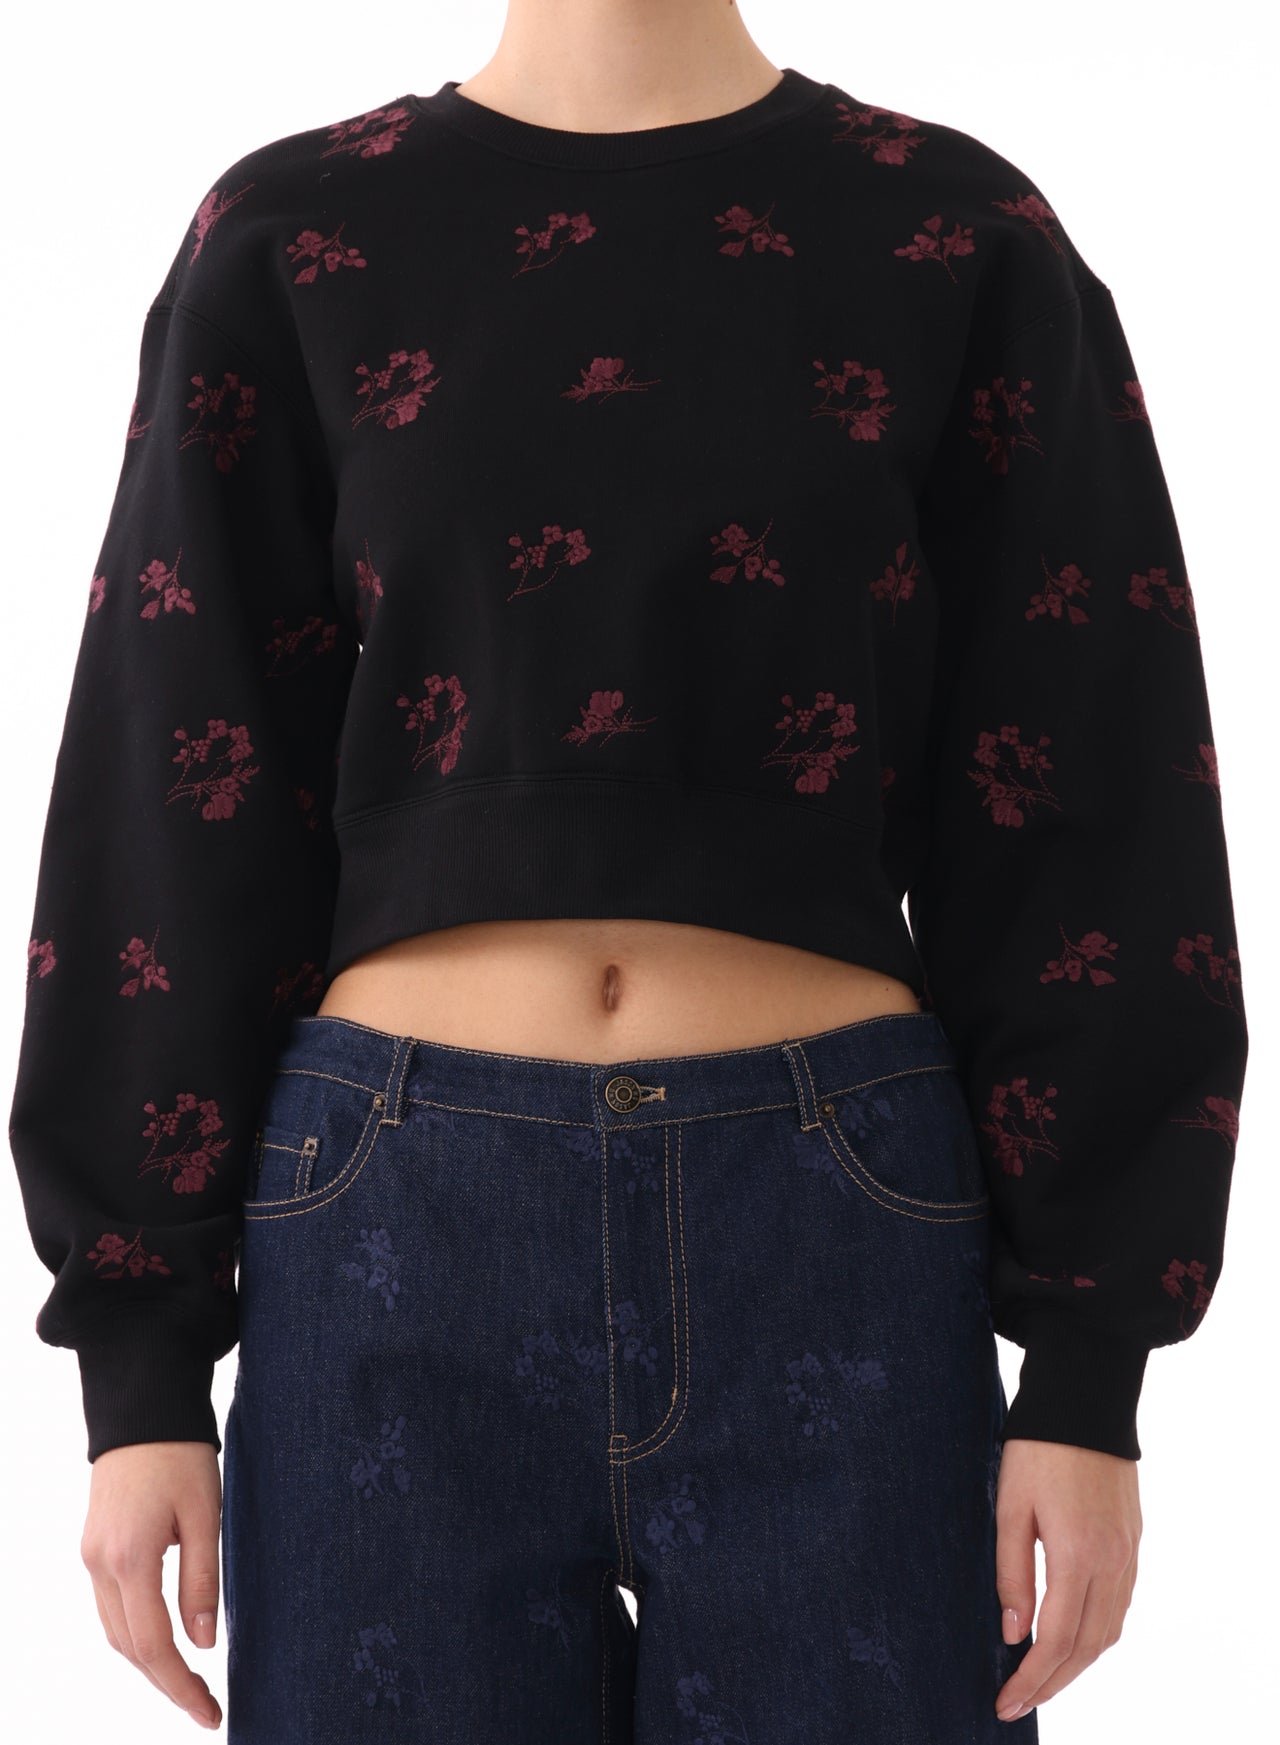 LONG SLEEVE SWEATSHIRT W/ FLORAL EMBROIDERY view 5